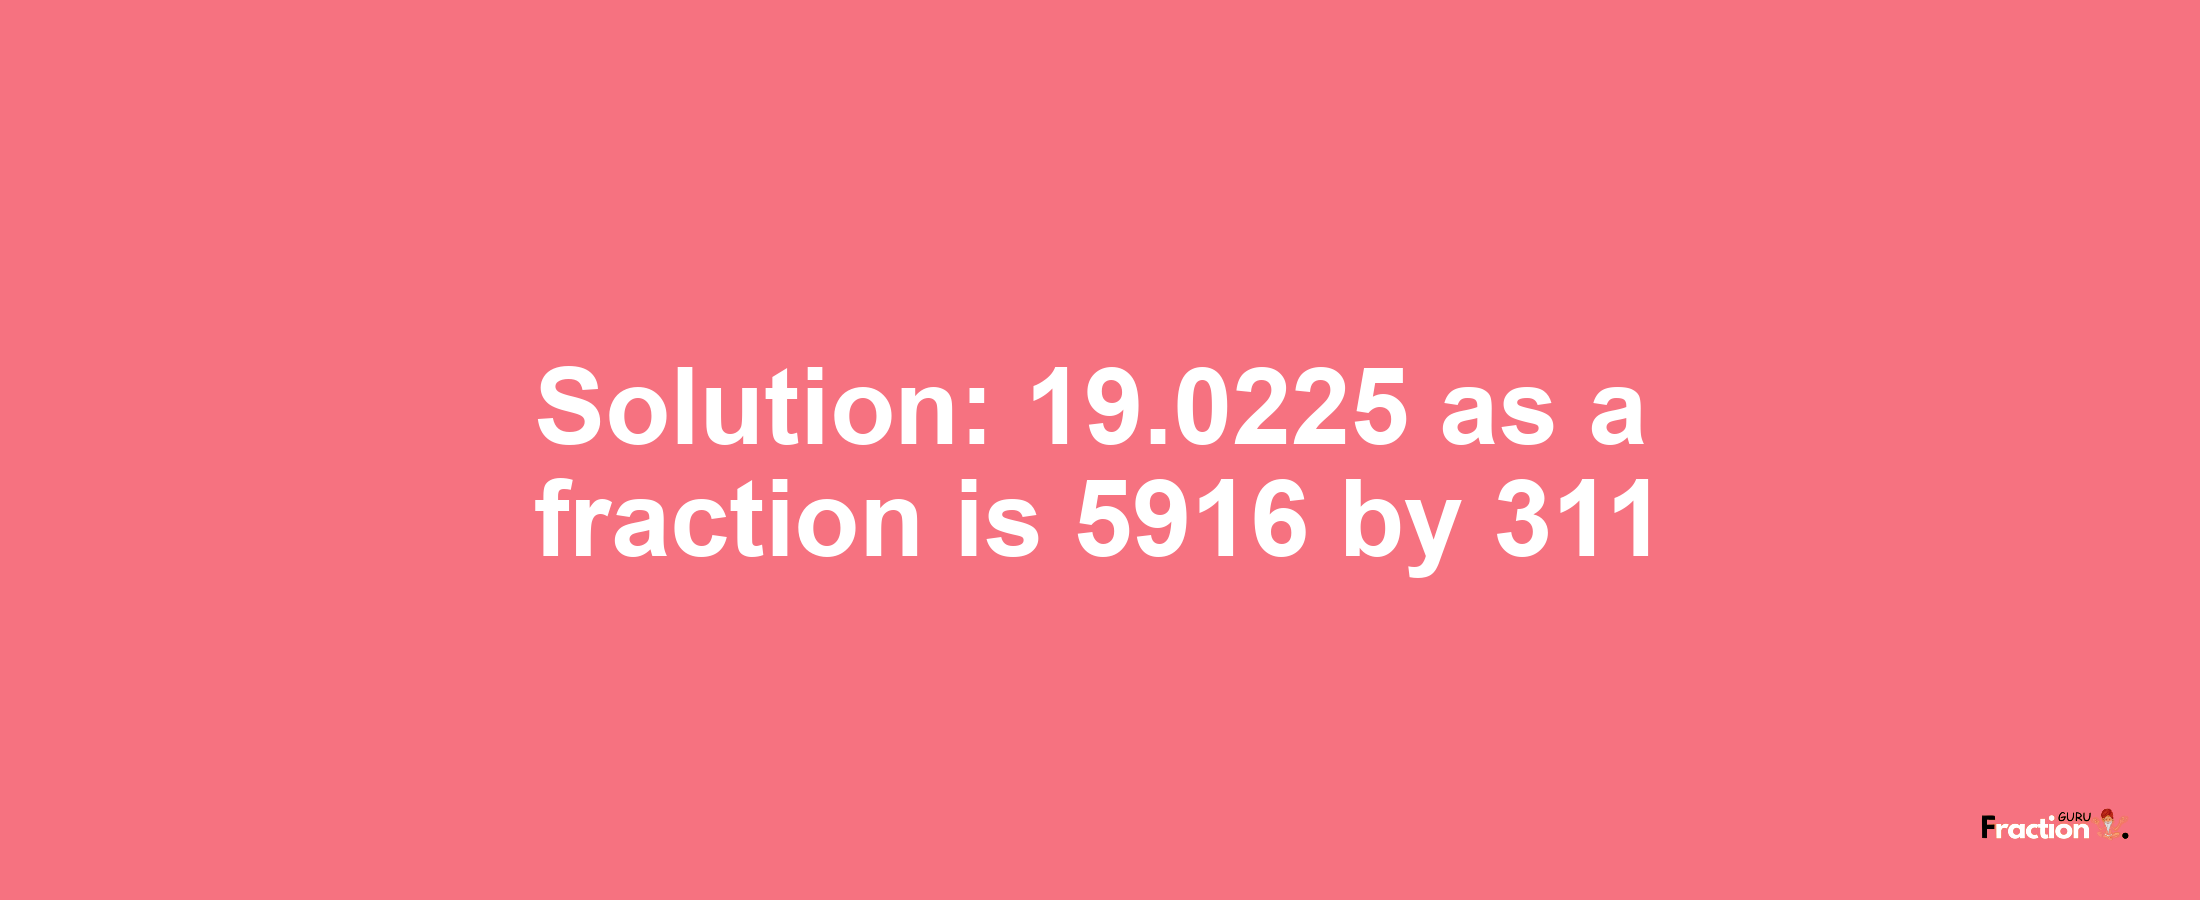 Solution:19.0225 as a fraction is 5916/311